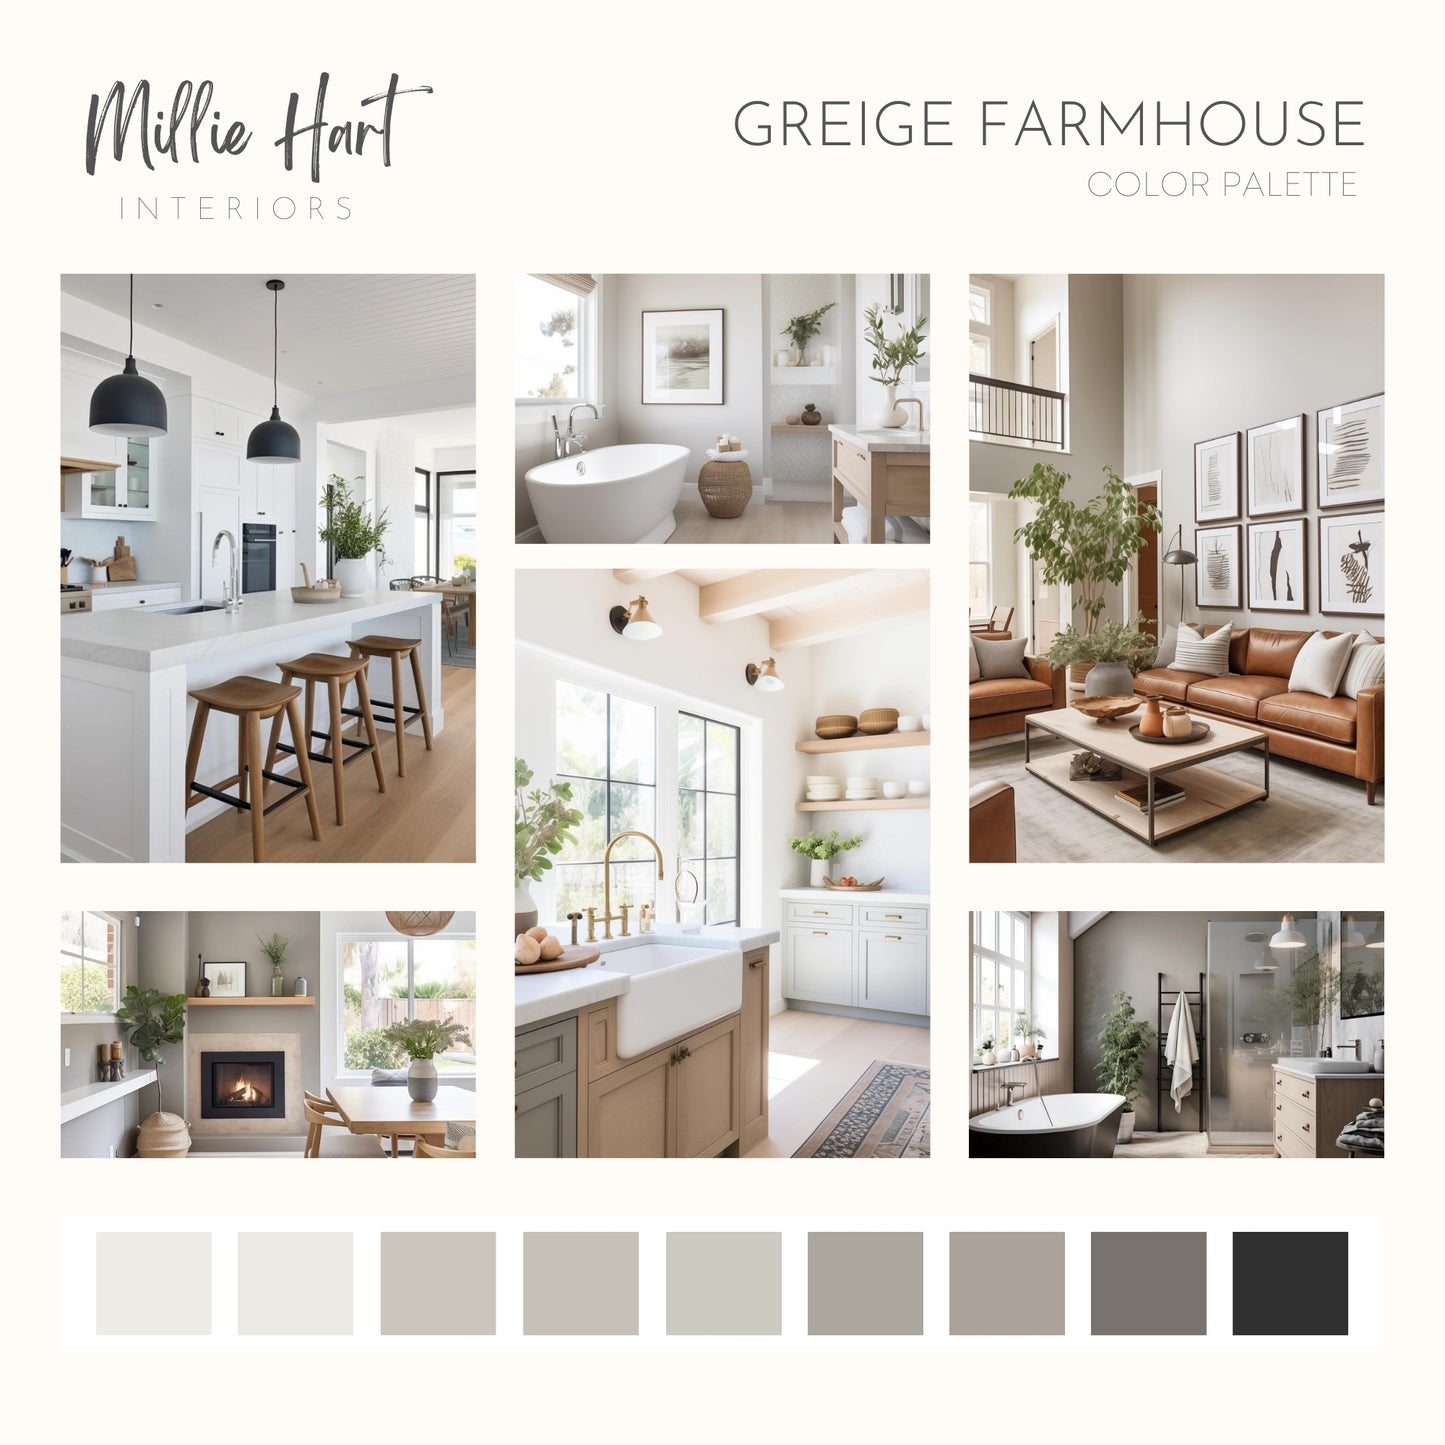 Greige Farmhouse Benjamin Moore Paint Palette - Modern Neutral Interior Paint Colors for Home - Coordinating Interior Design Color Palette, Benjamin Moore, Gray Mountain